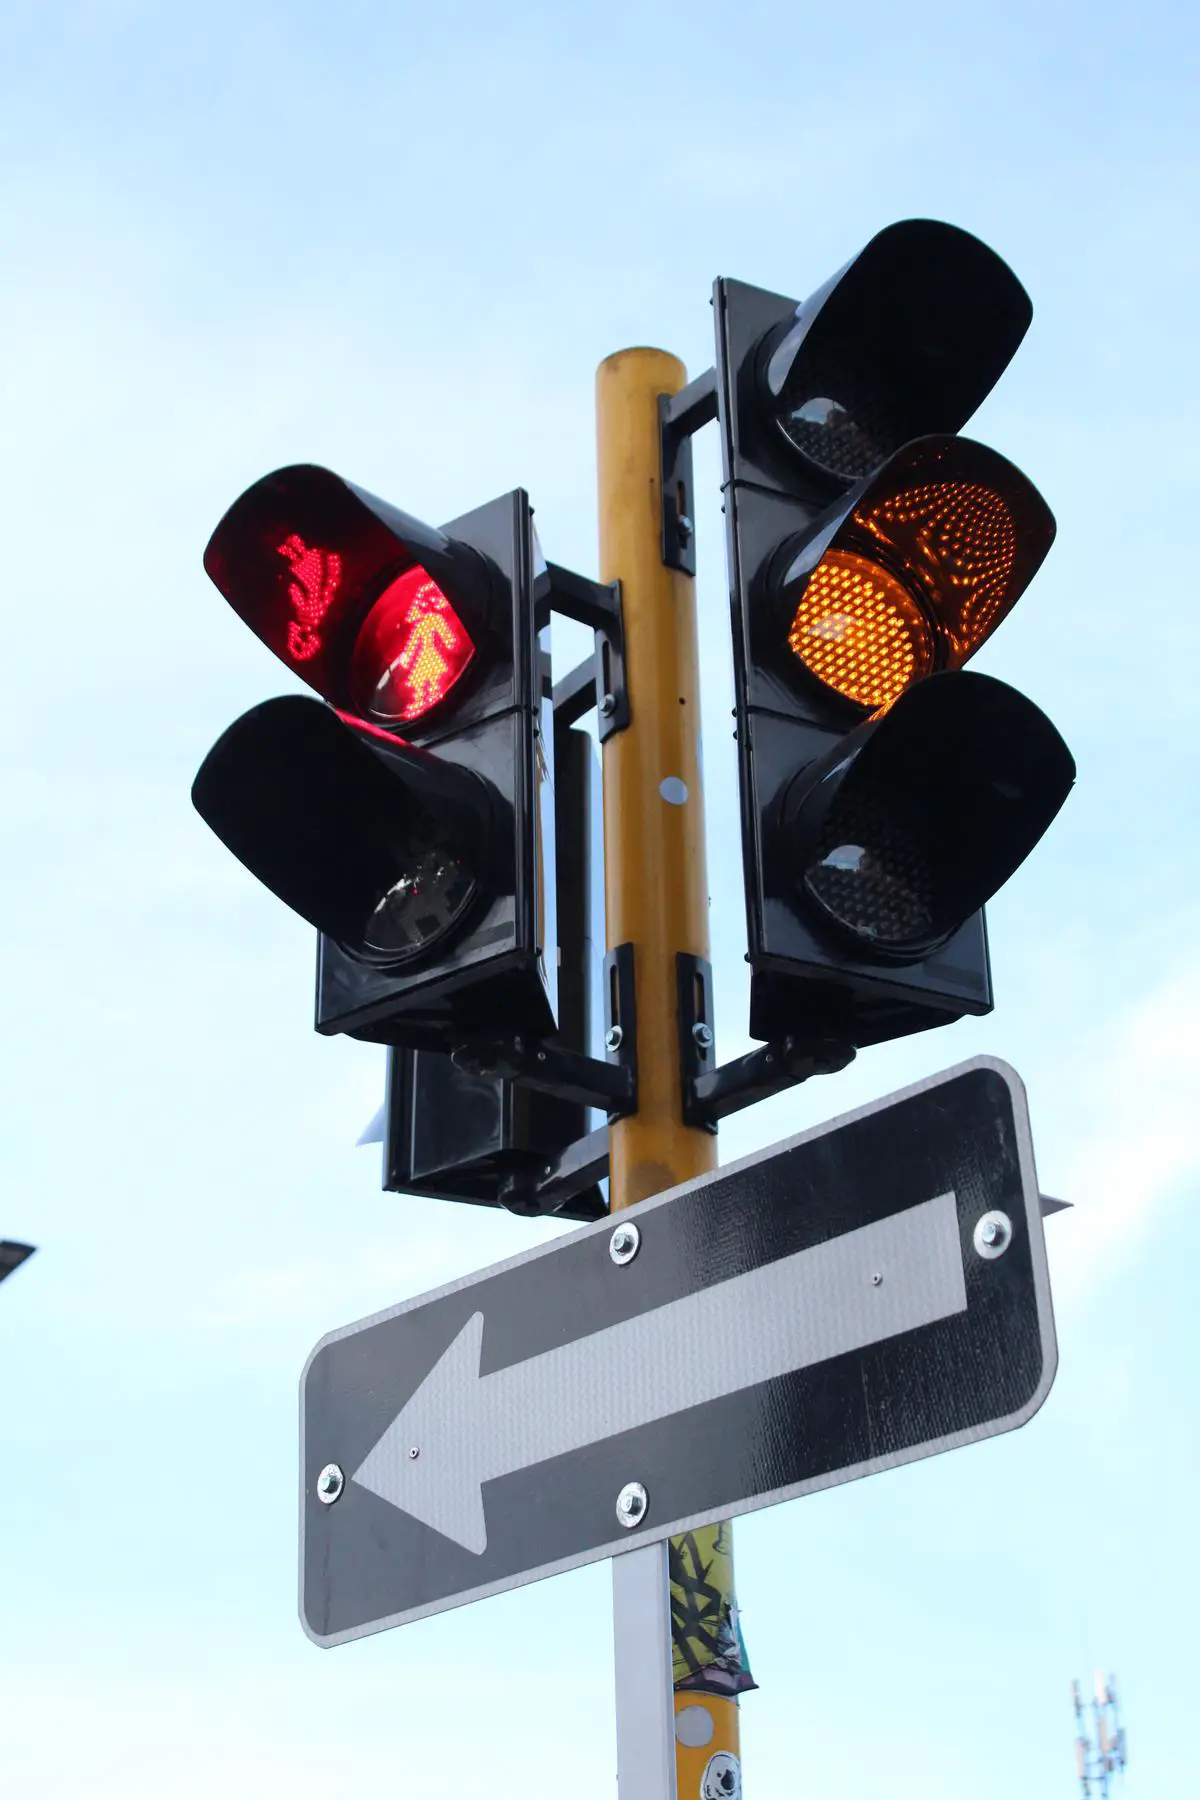 A red light on top of a traffic signal to show when vehicles should stop at intersections, contributing to traffic congestion.